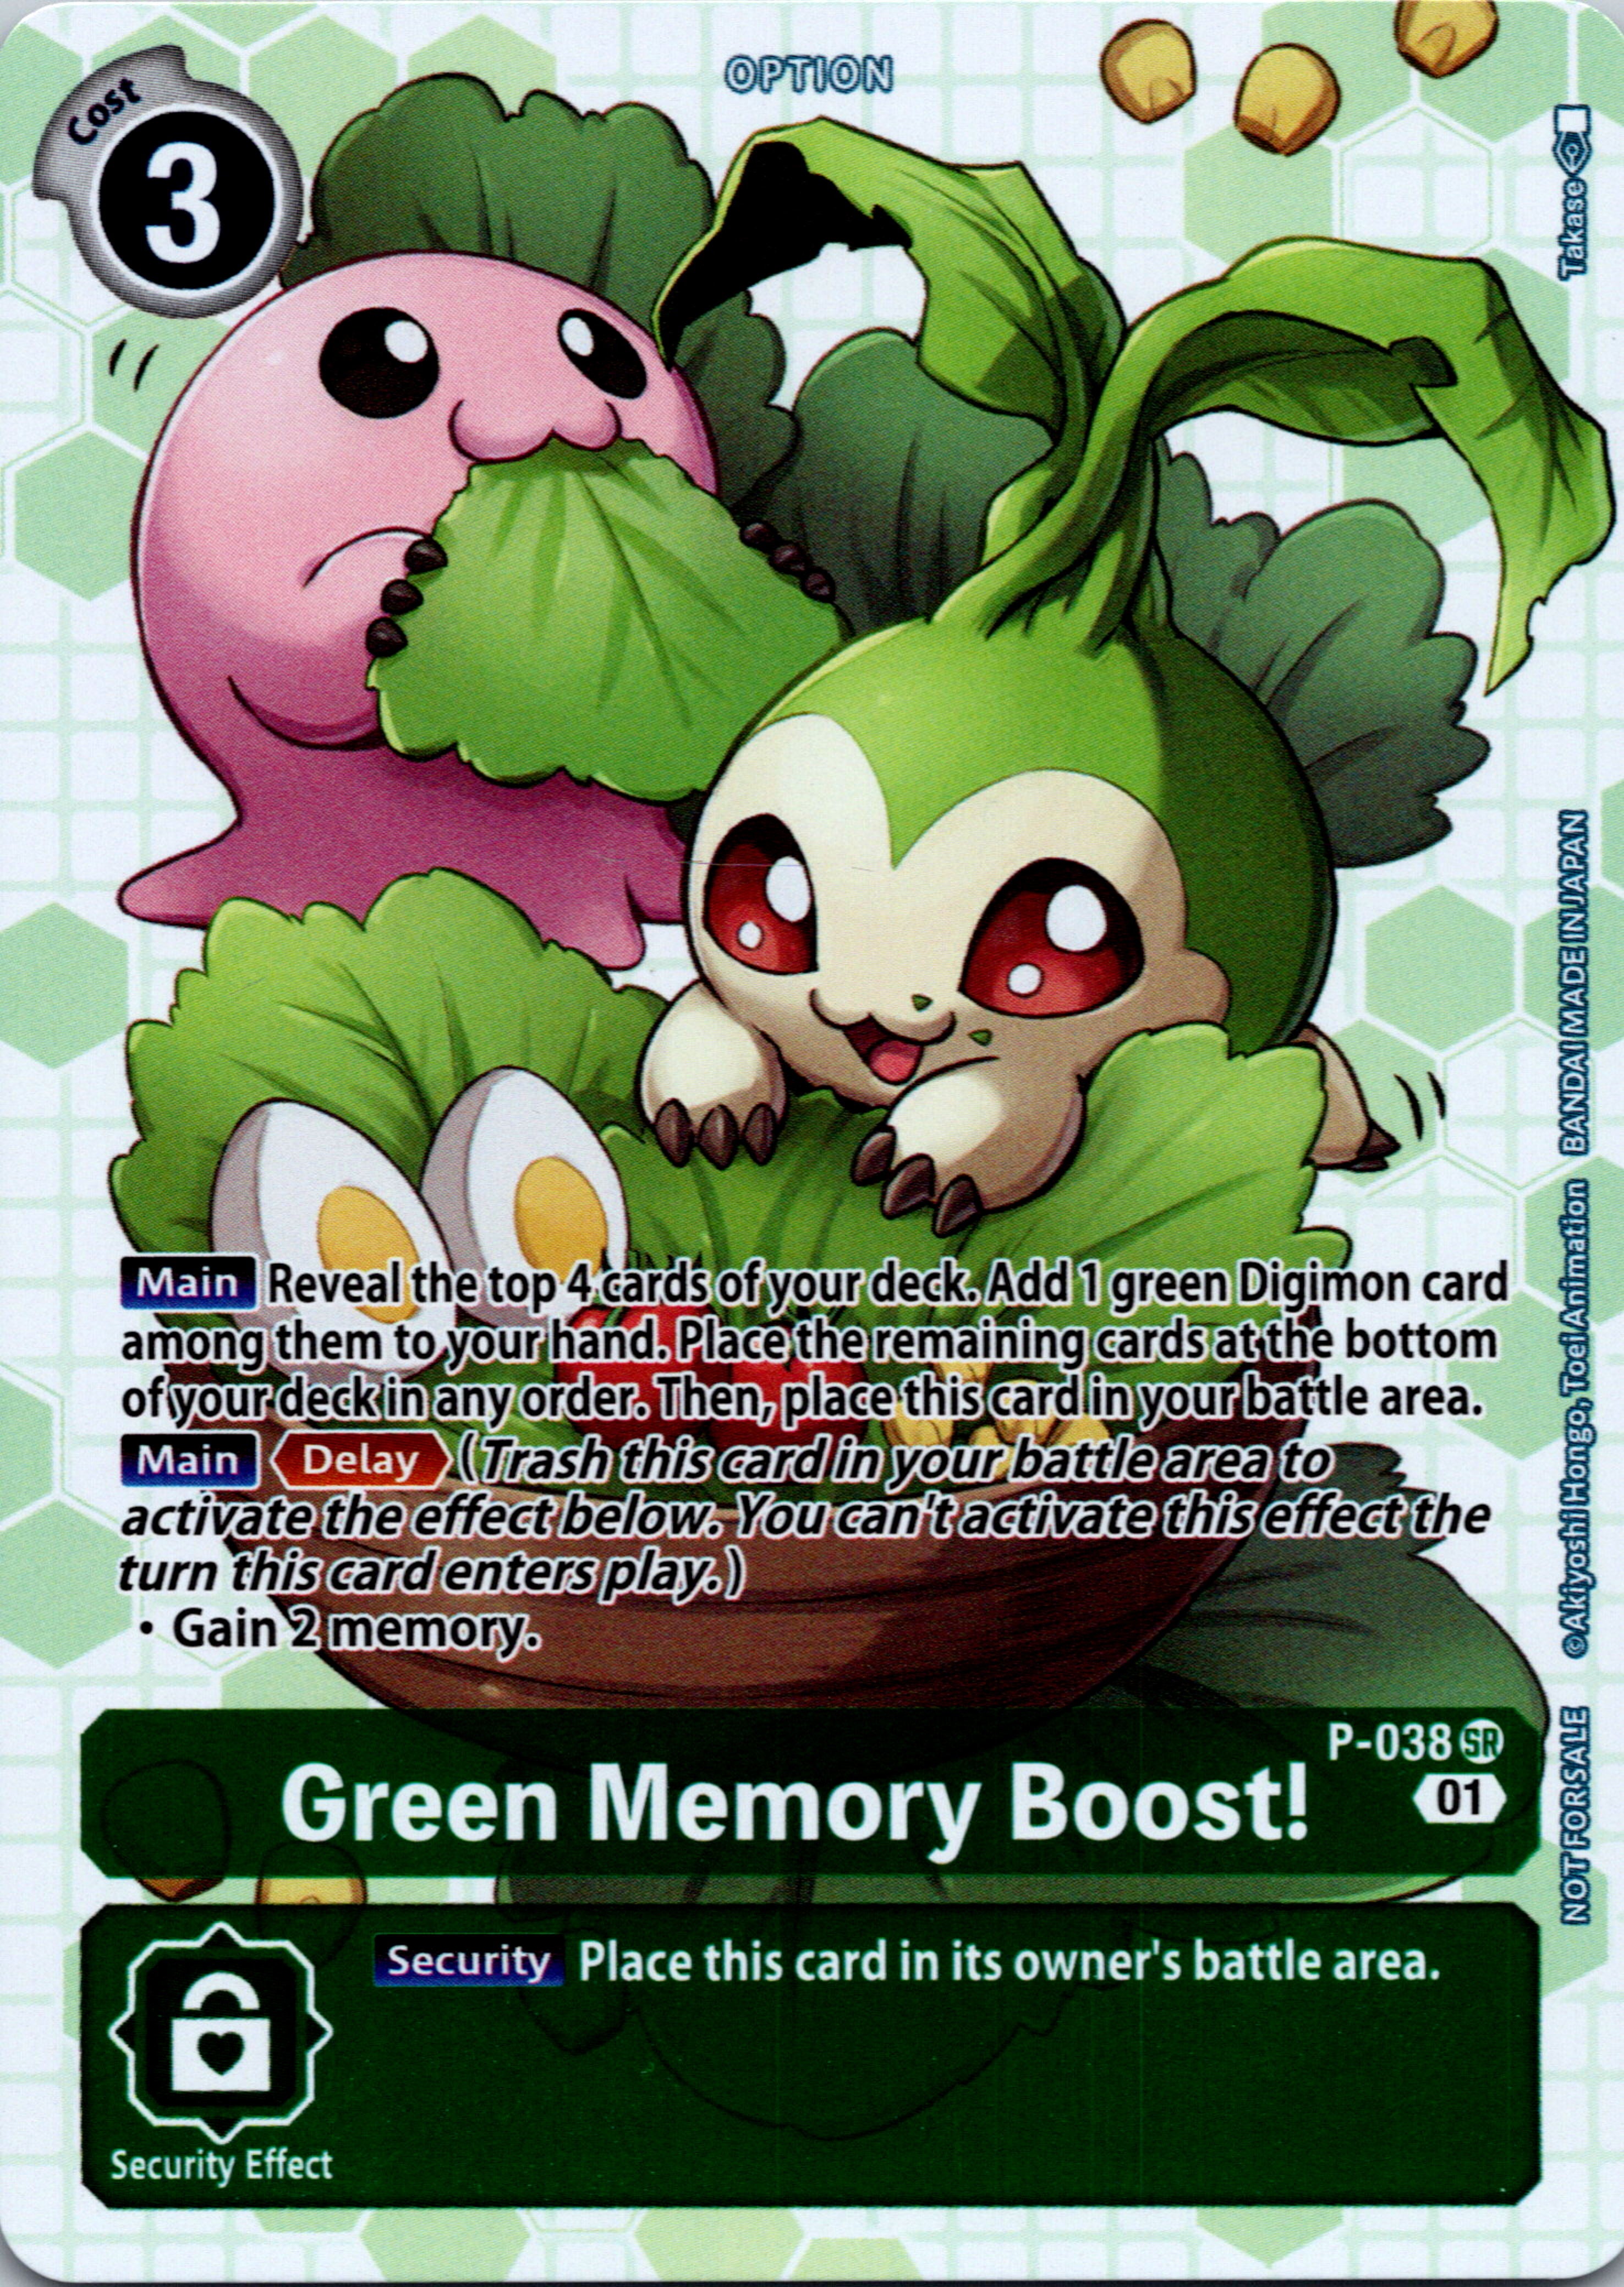 Green Memory Boost! - P-038 (Next Adventure Box Promotion Pack) [P-038] [Digimon Promotion Cards] Normal